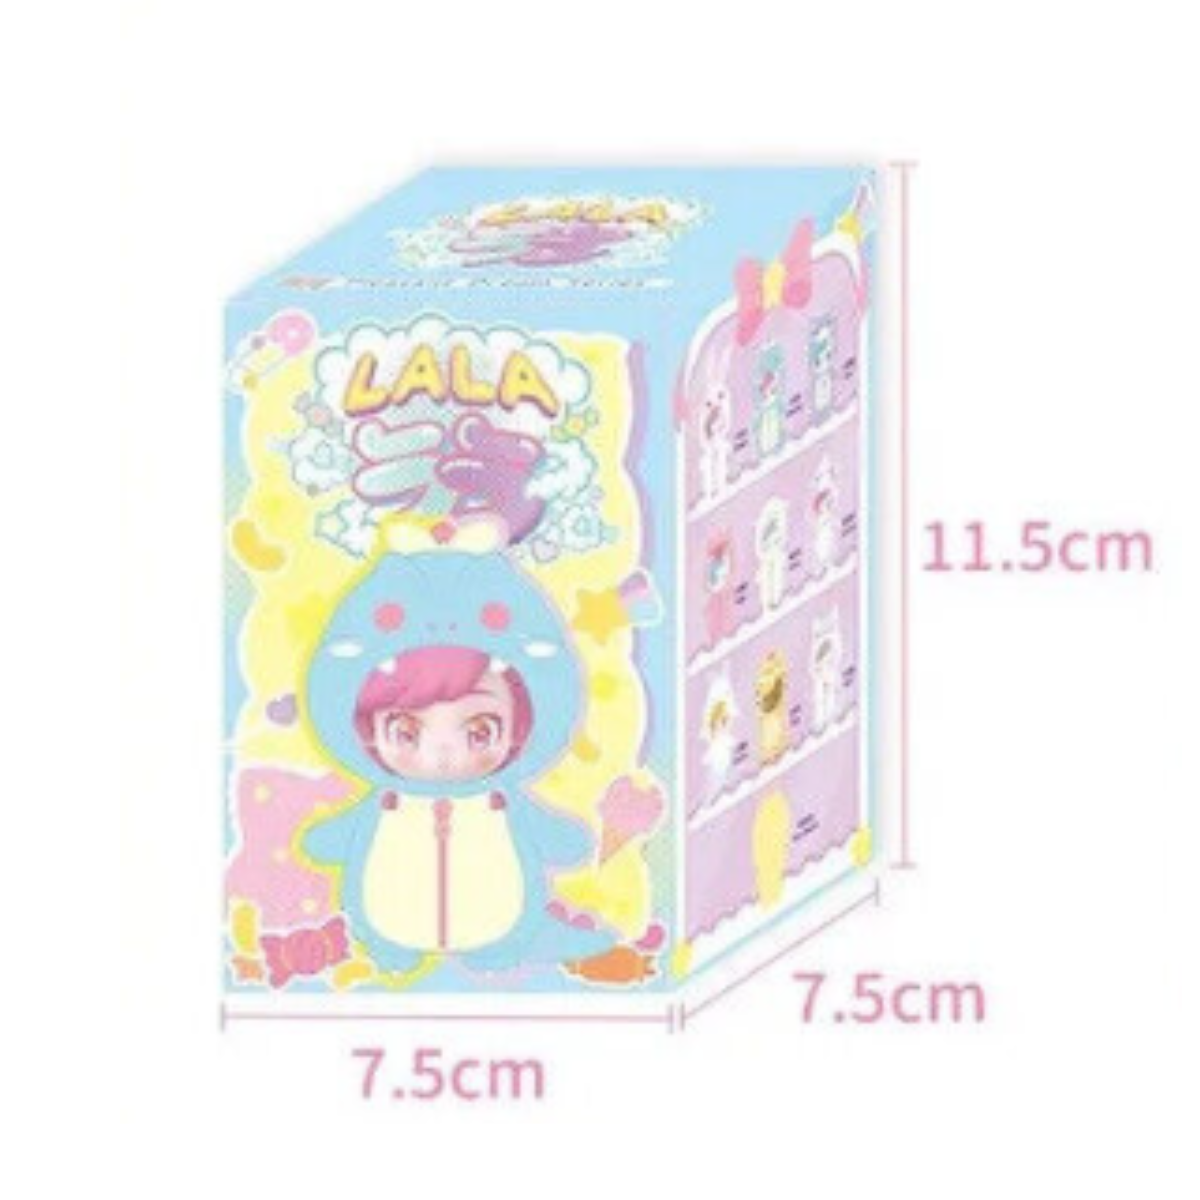 TOPTOY LaLa Pleasant Dream Series-Single Box (Random)-TopToy-Ace Cards &amp; Collectibles